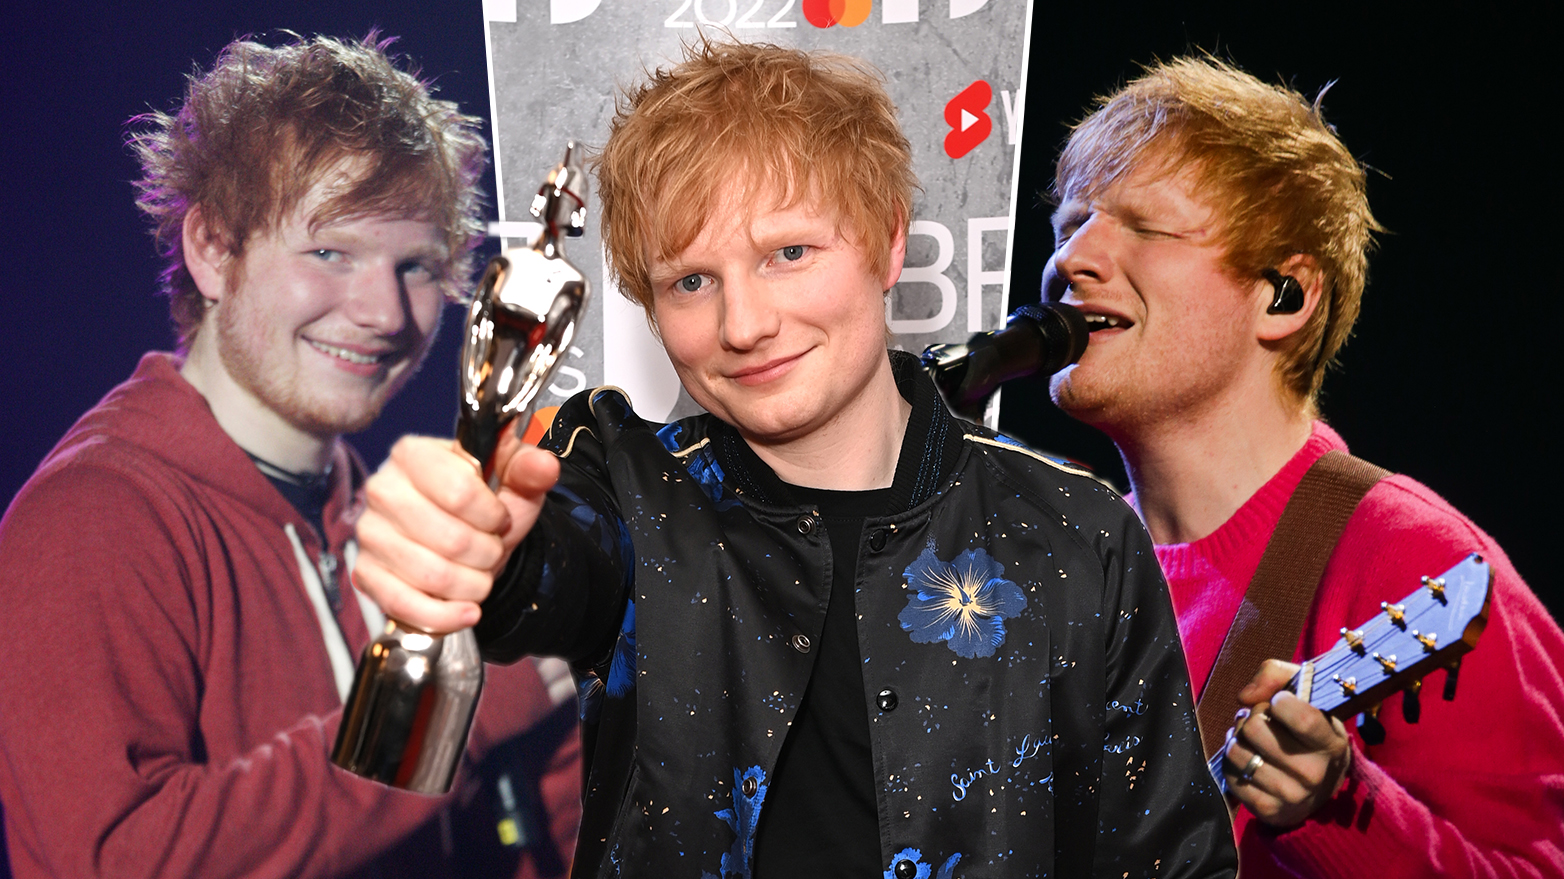 Ed Sheeran's Career Transformation Over the Years in Photos